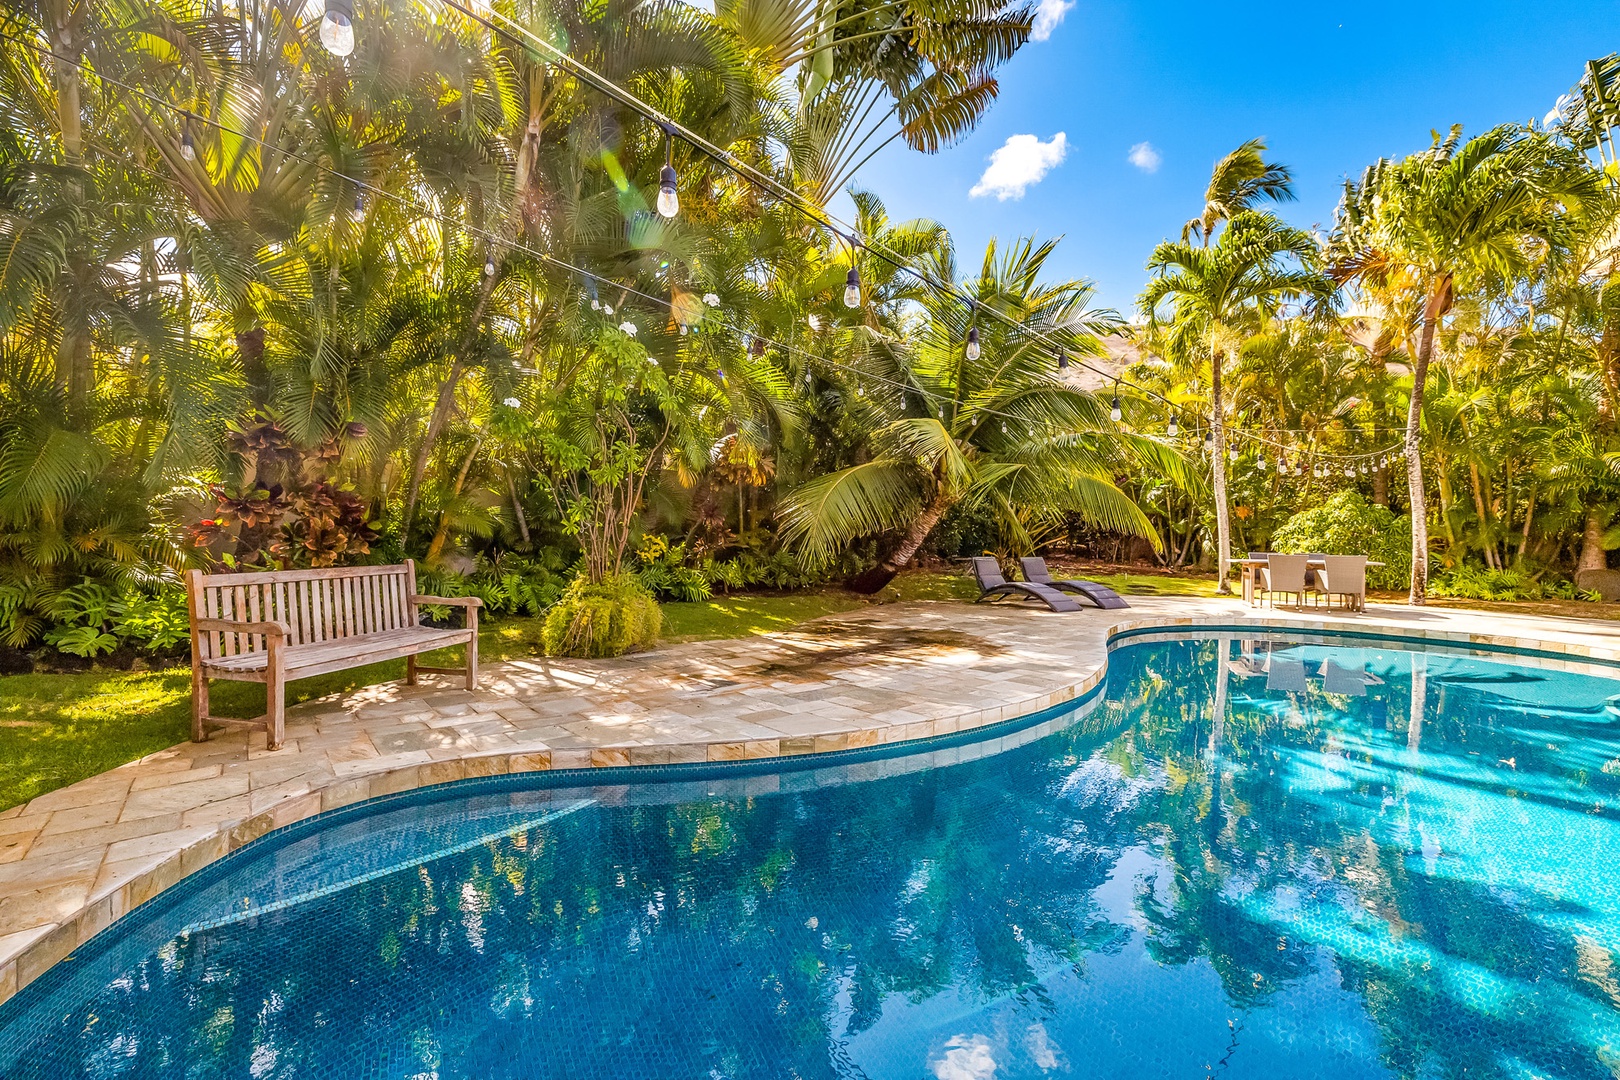 Honolulu Vacation Rentals, Hale Ho'omaha - Cool off and take a refreshing dip in your private pool